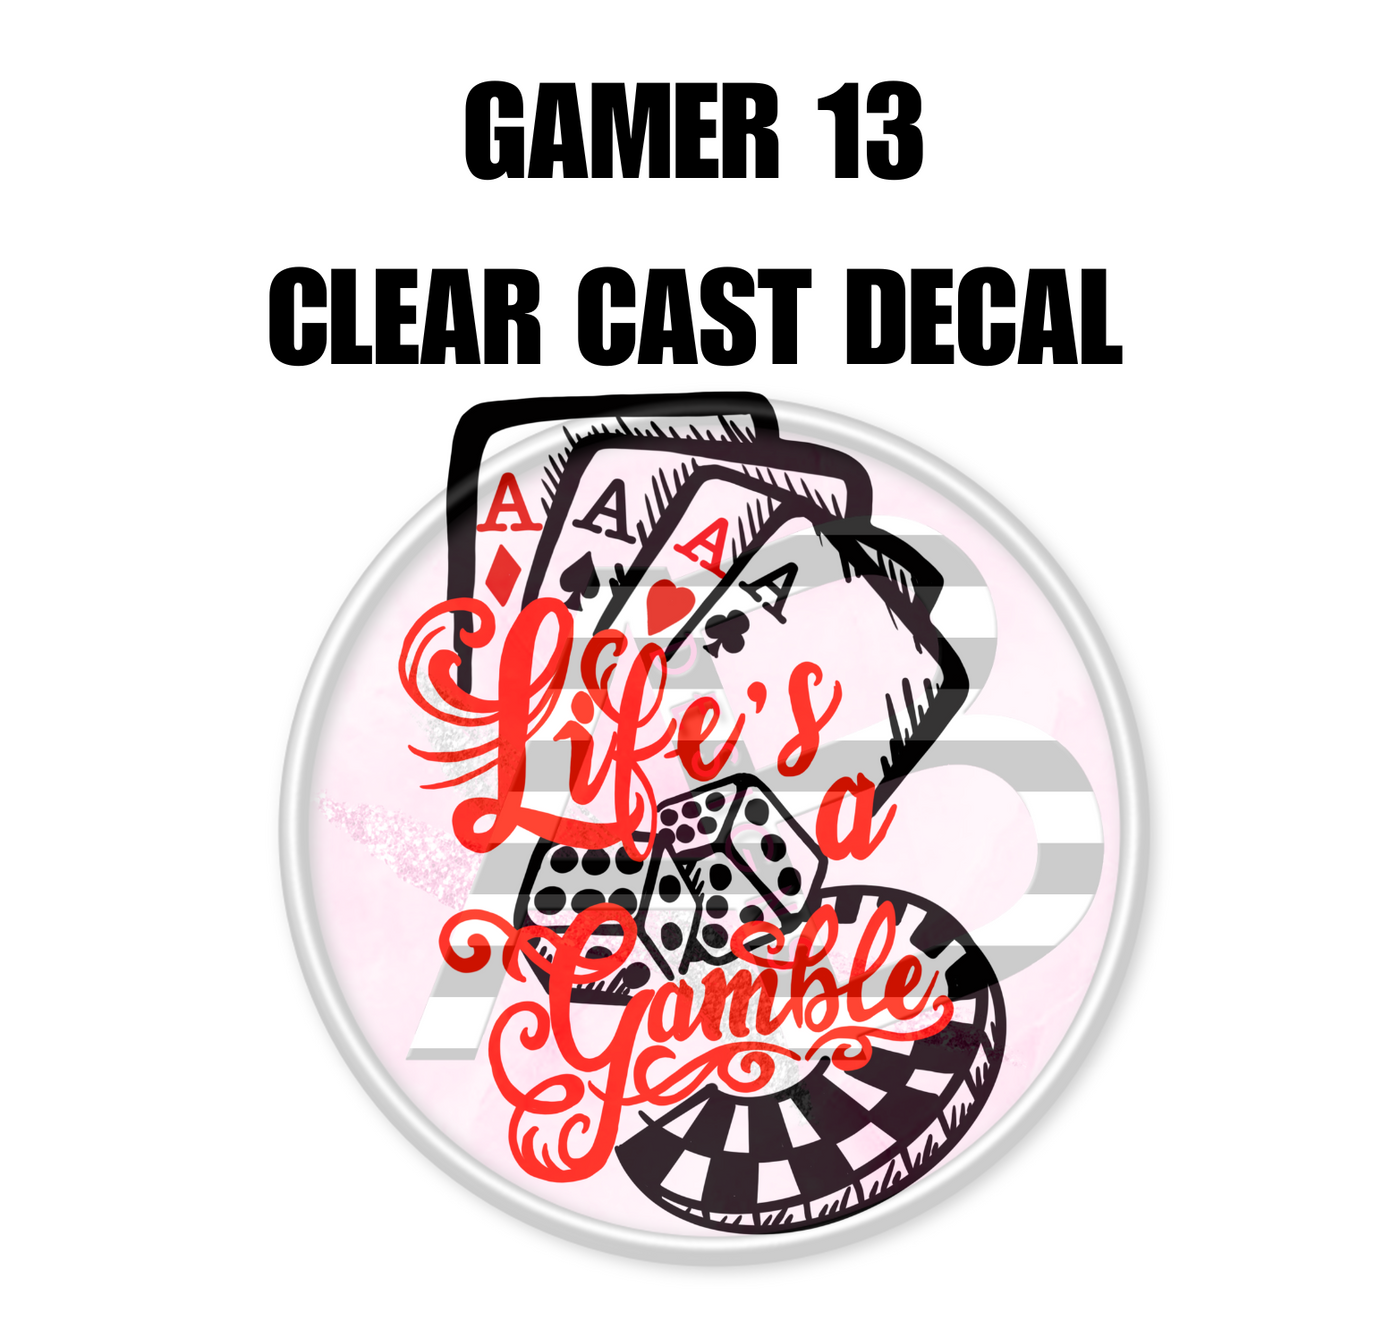 Gamer 13 - Clear Cast Decal - 287